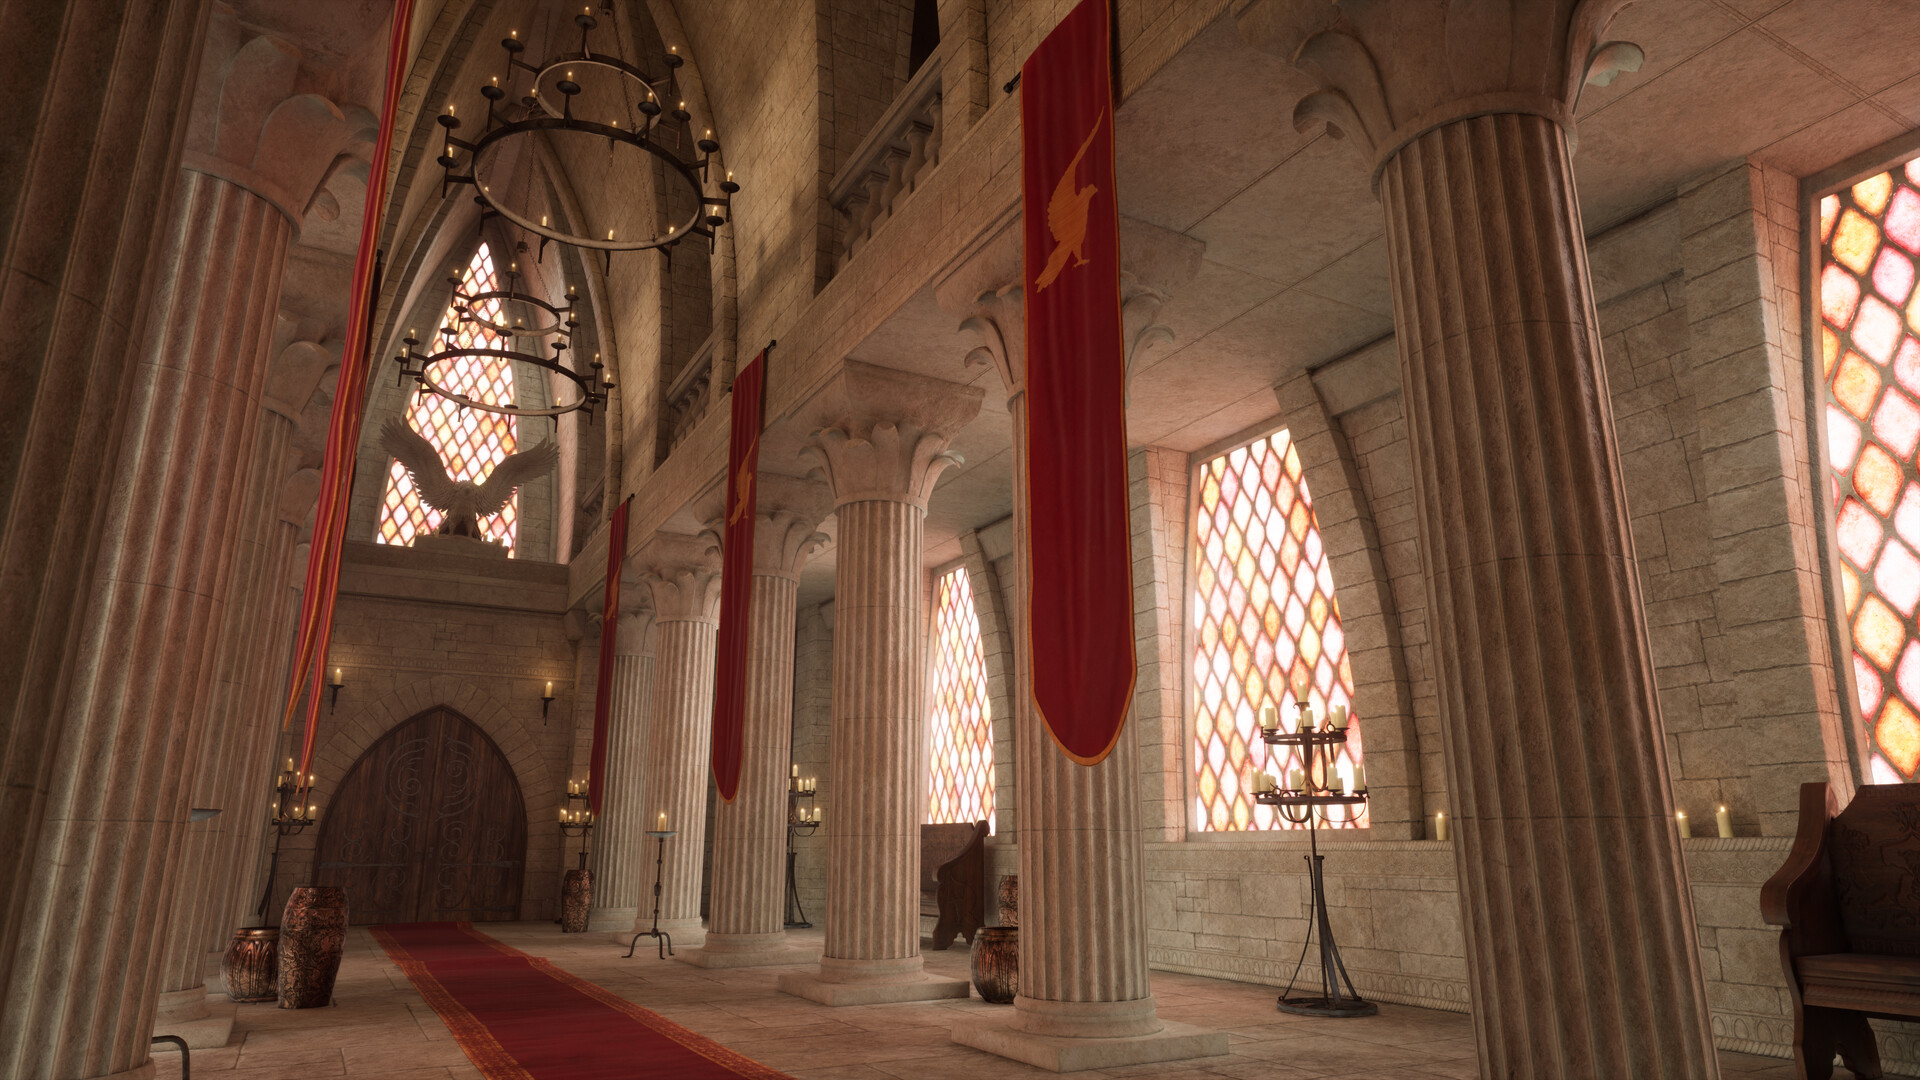 Dragons Great Hall in Environments - UE Marketplace